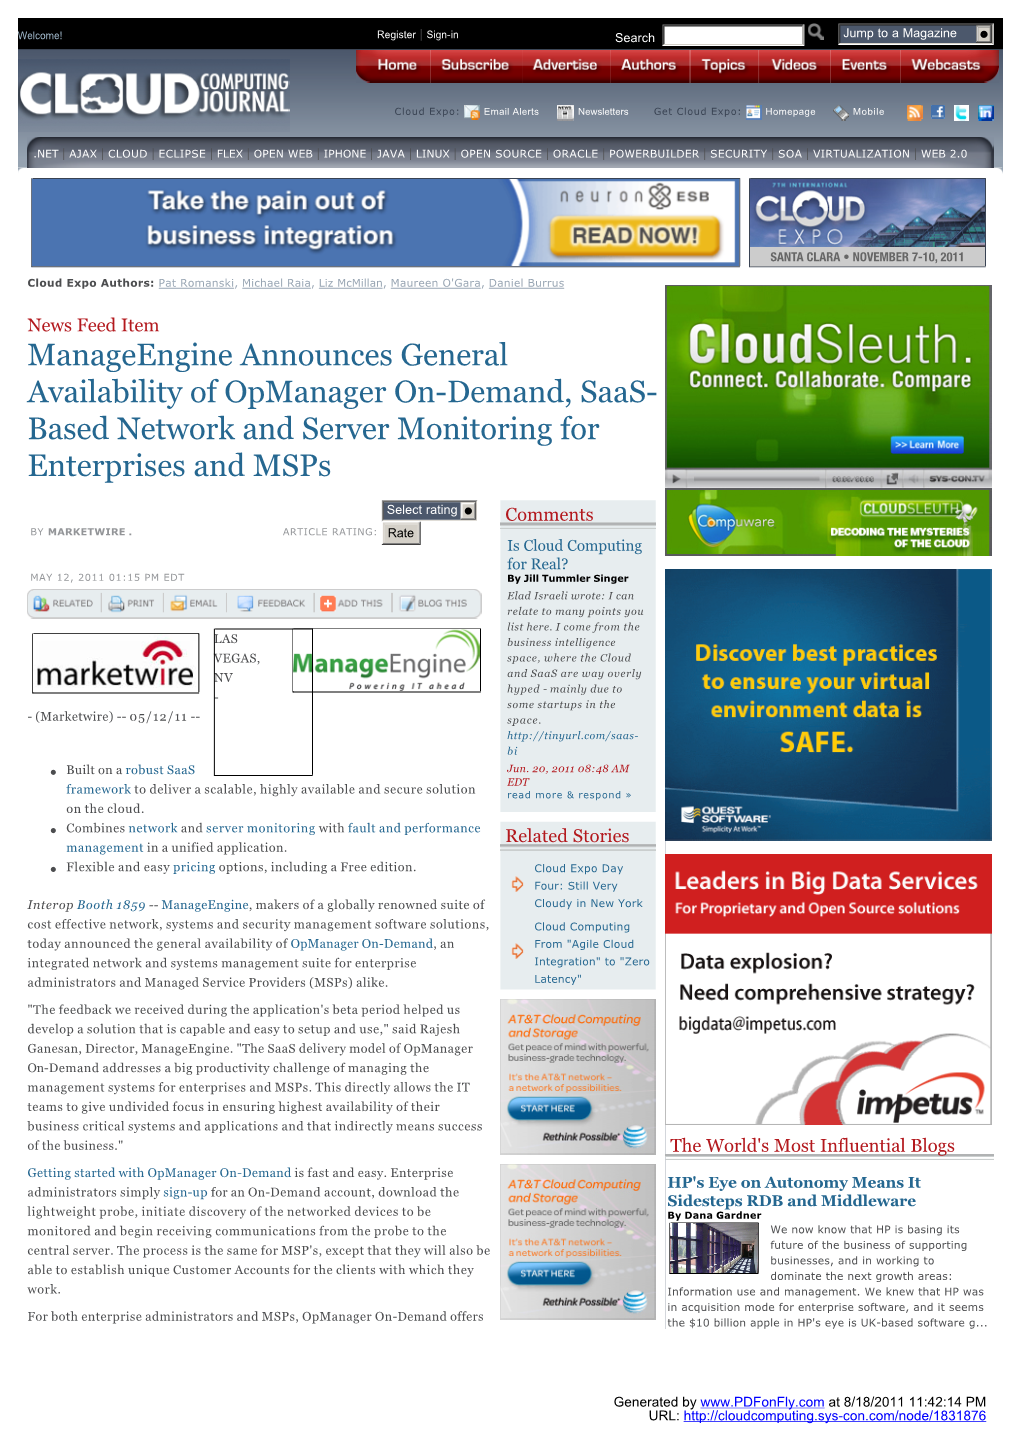 Manageengine Announces General Availability of Opmanager On-Demand, Saas- Based Network and Server Monitoring for Enterprises and Msps